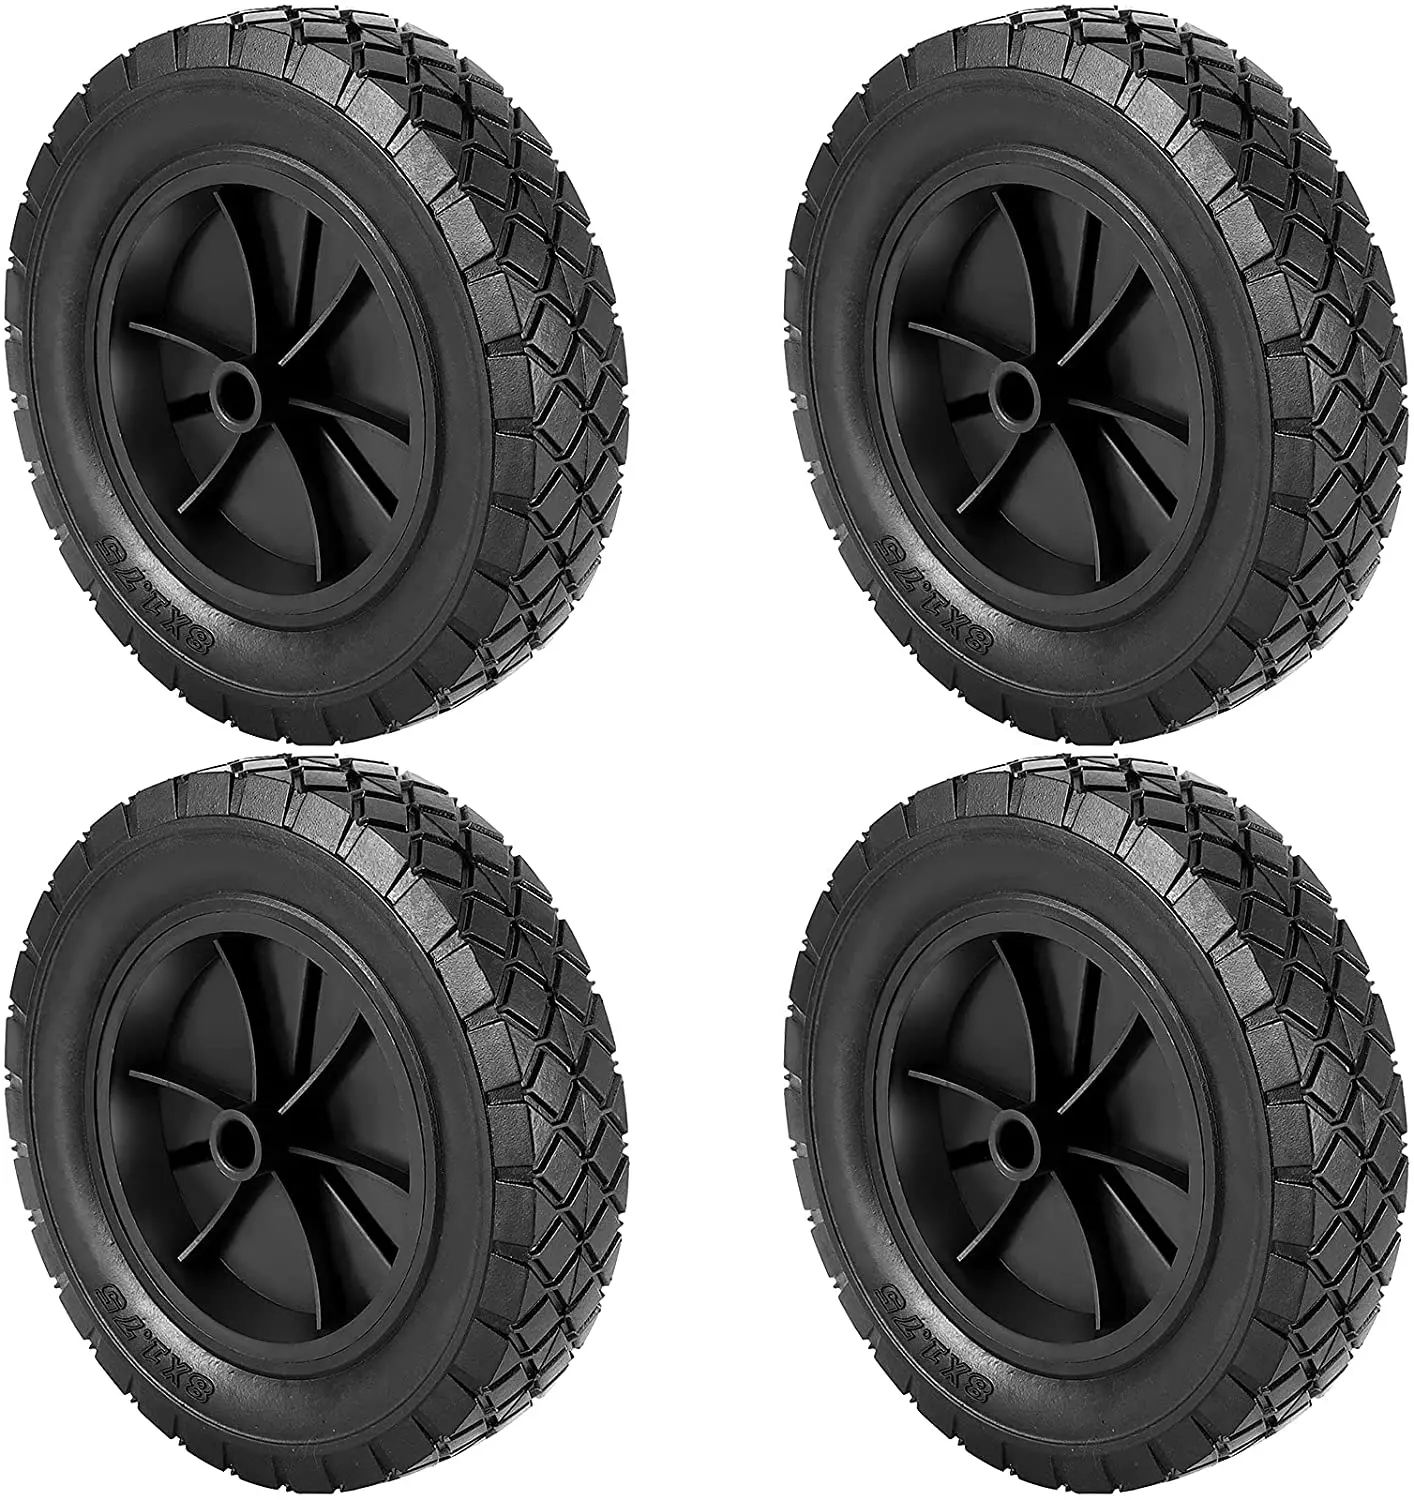 Utility Carts Plastic Wheel with Diamond Tread for Hand Trucks Lawn Mowers PINGEUI 4 Pack 8 x 1.75 Inch Solid Rubber Hand Truck Wheel 1/2 Inch Axles Wheelbarrow 